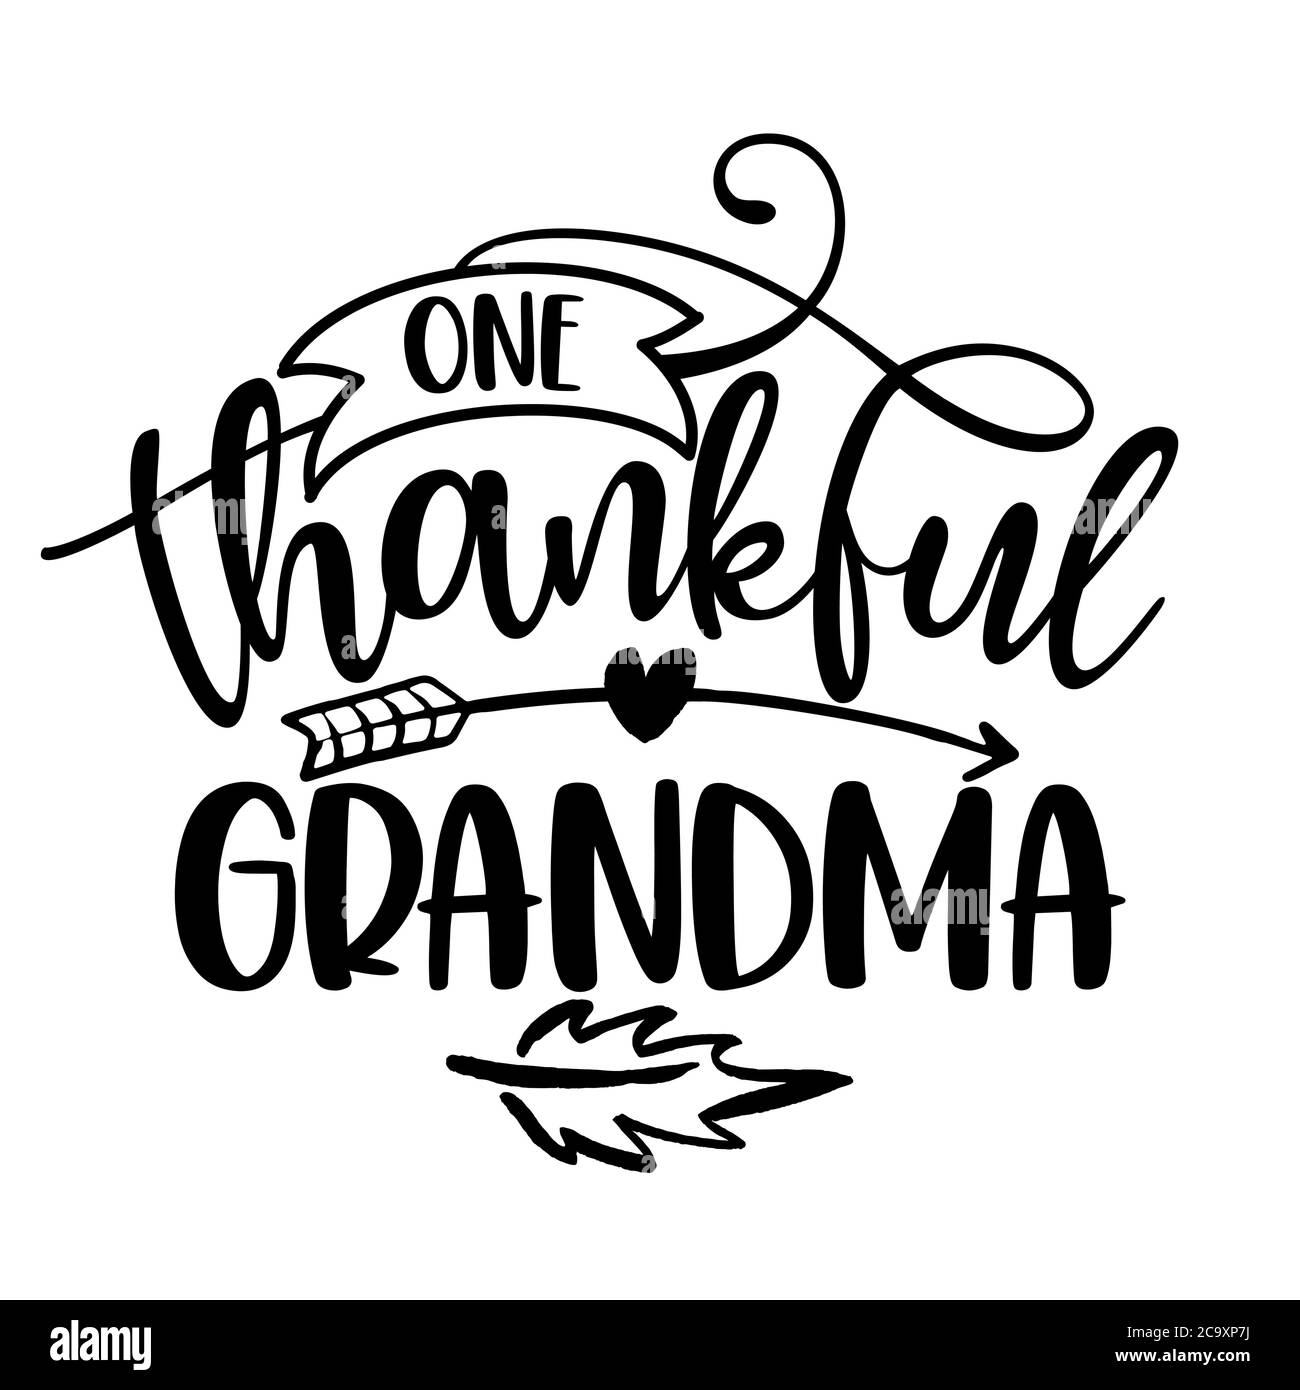 One Thankful Grandma - Inspirational Thanksgiving day or Harvest handwritten word, lettering message. Handwritten calligraphy for fall. Good for t shi Stock Vector